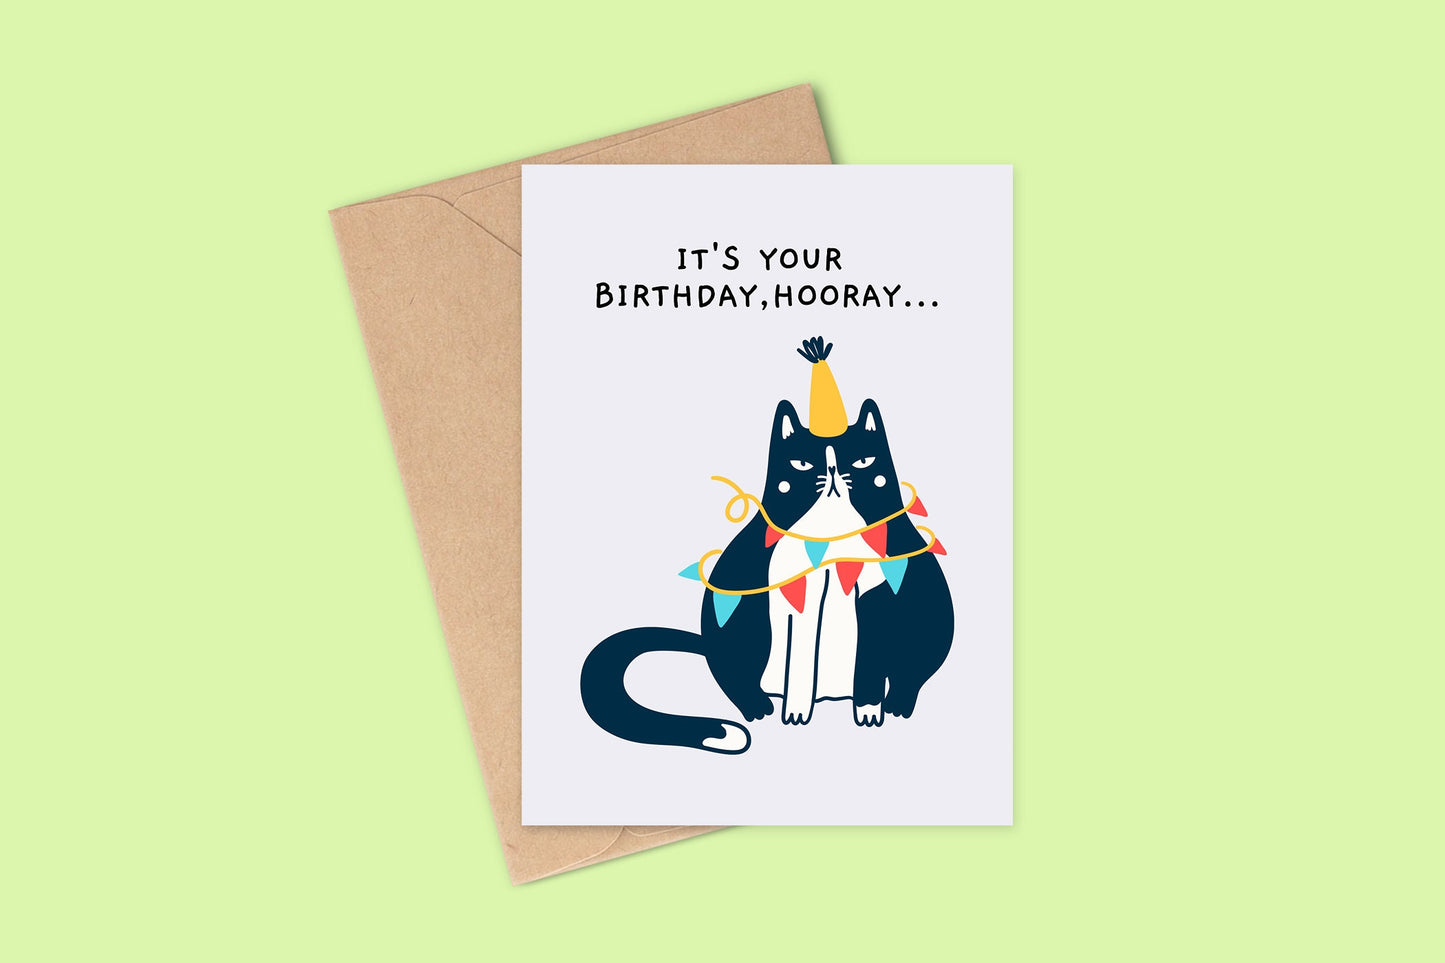 Funny Birthday Card For Him or Her, Sarcastic Cat, Funny Card, Birthday card, Funny Birthday Cards, Card for Cat Lover